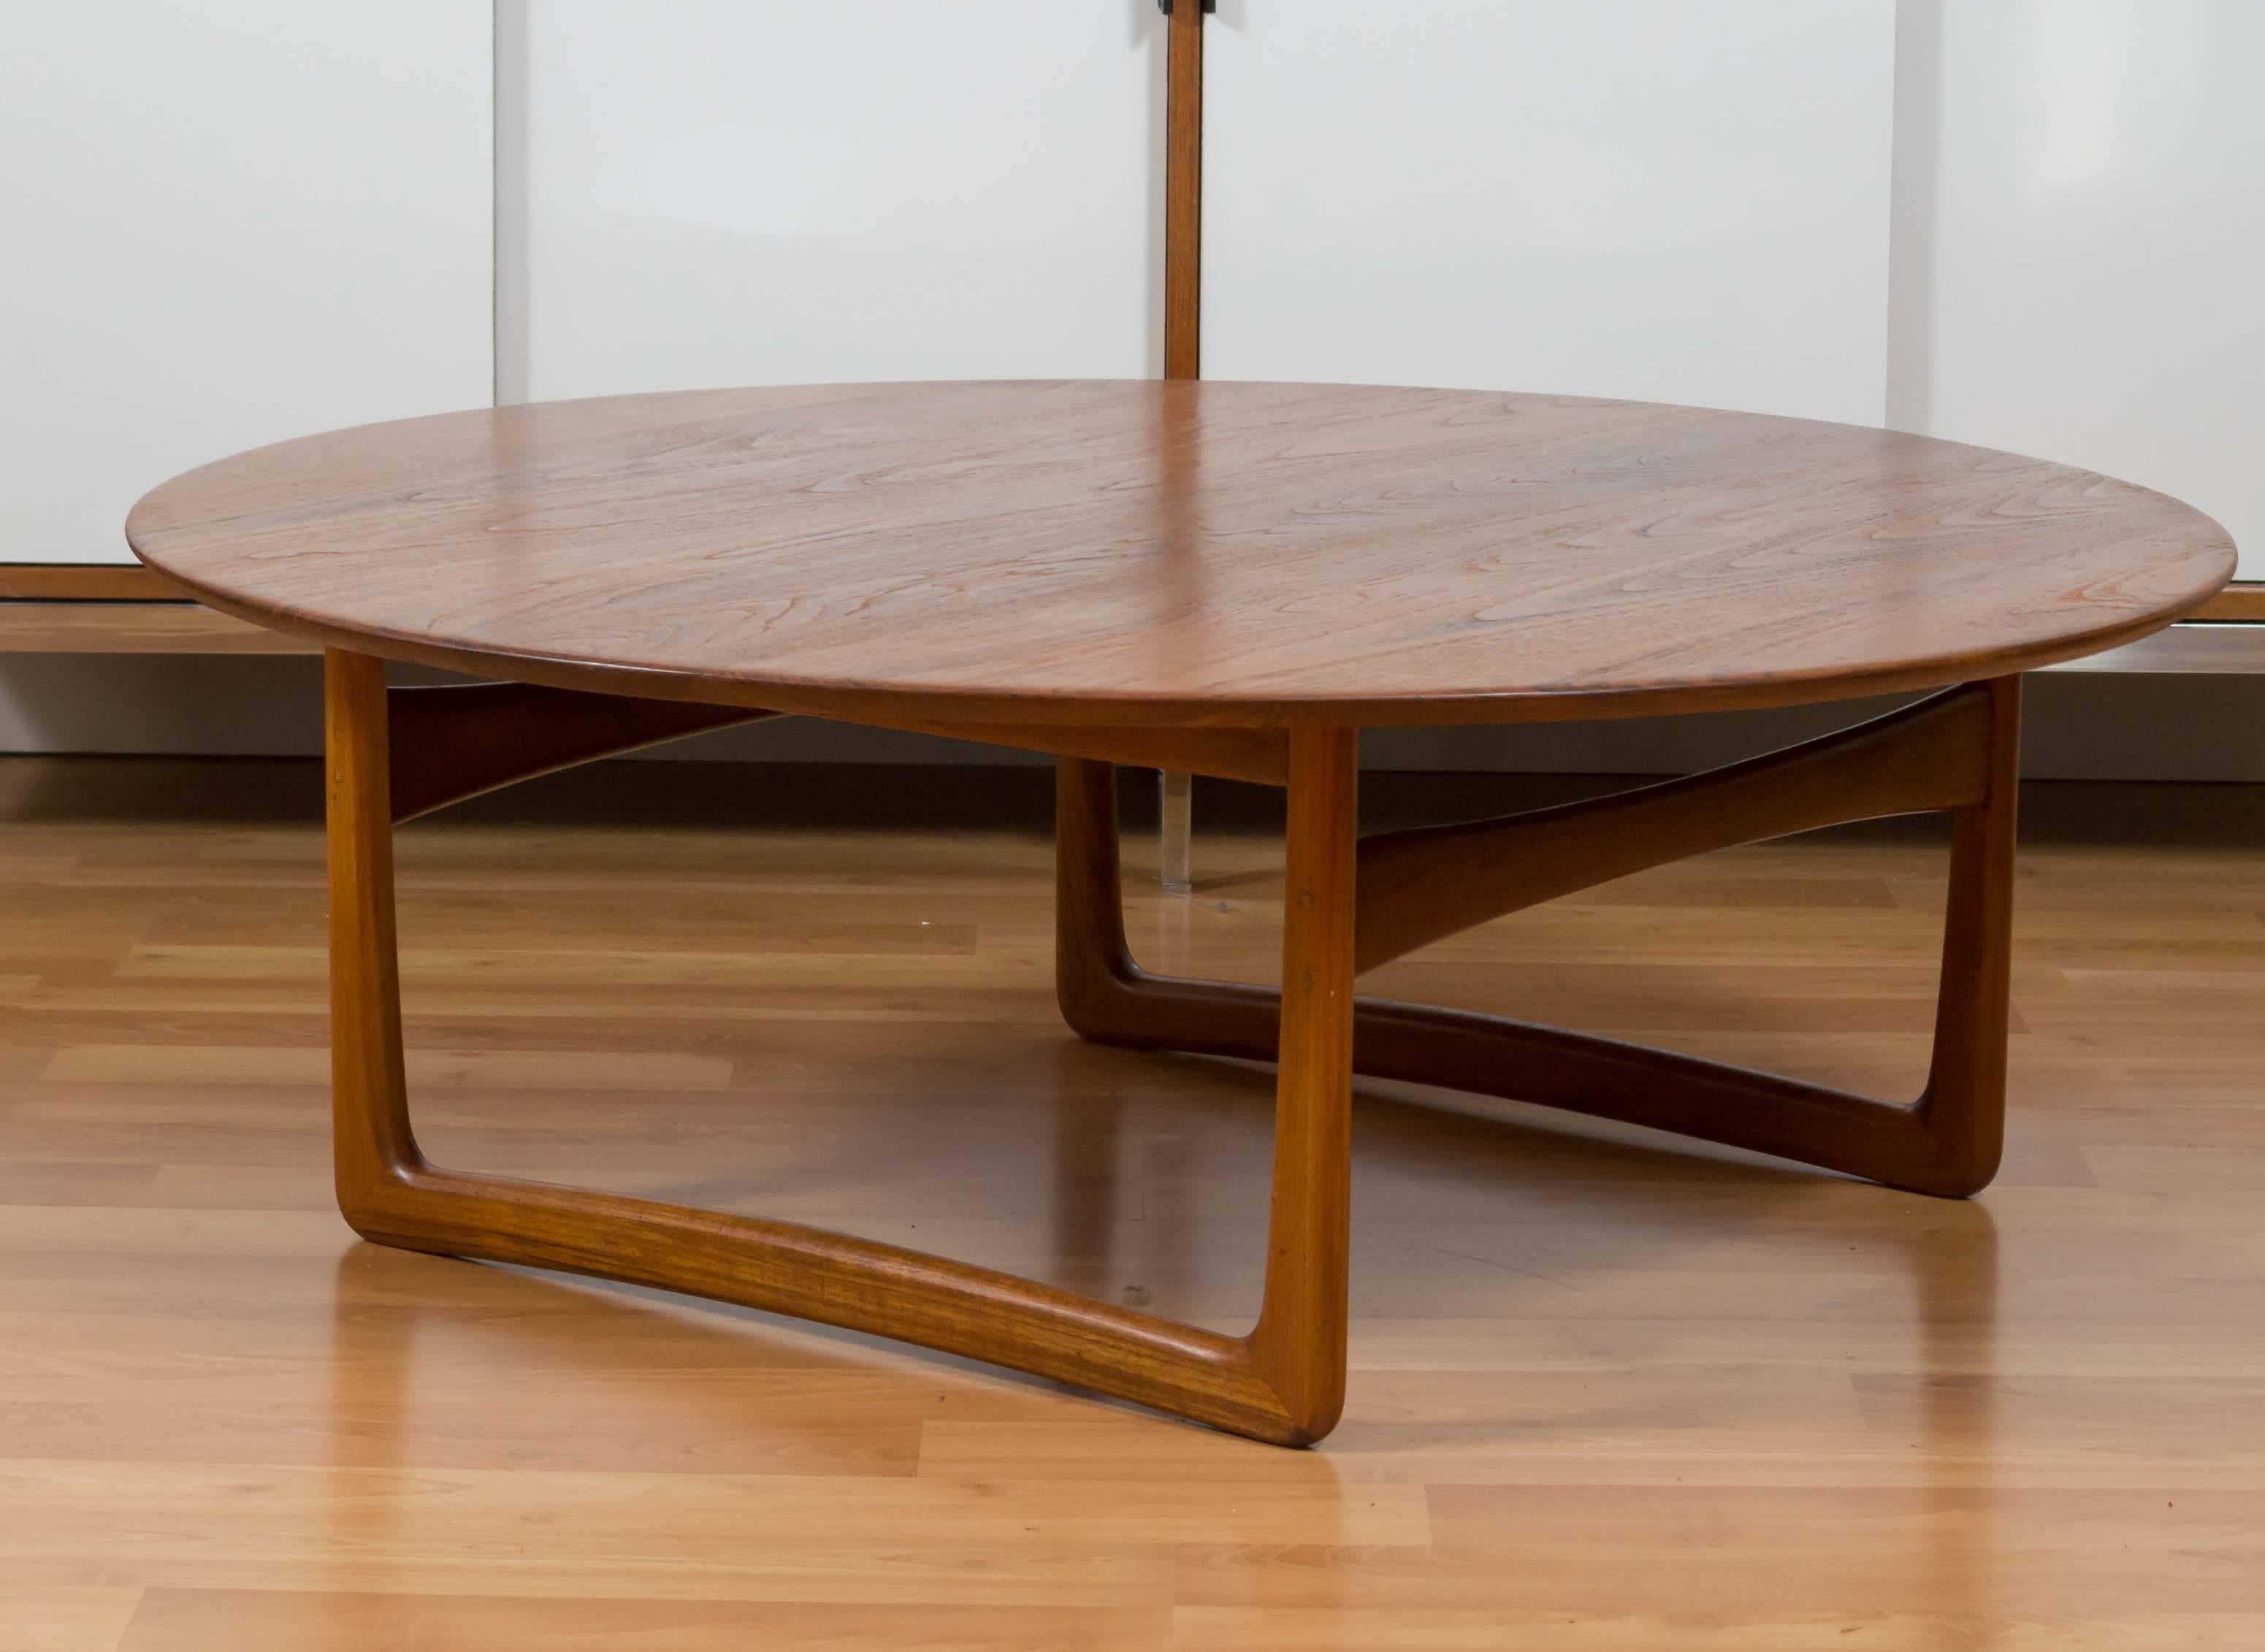 This impressive France & Daverkosen (later France & Son) solid teak coffee table was designed by Orla Mølgaard for John Stuart.

Its expansive bevel edge circular top sits upon a sculpted sled base. The table has been professionally refinished, so